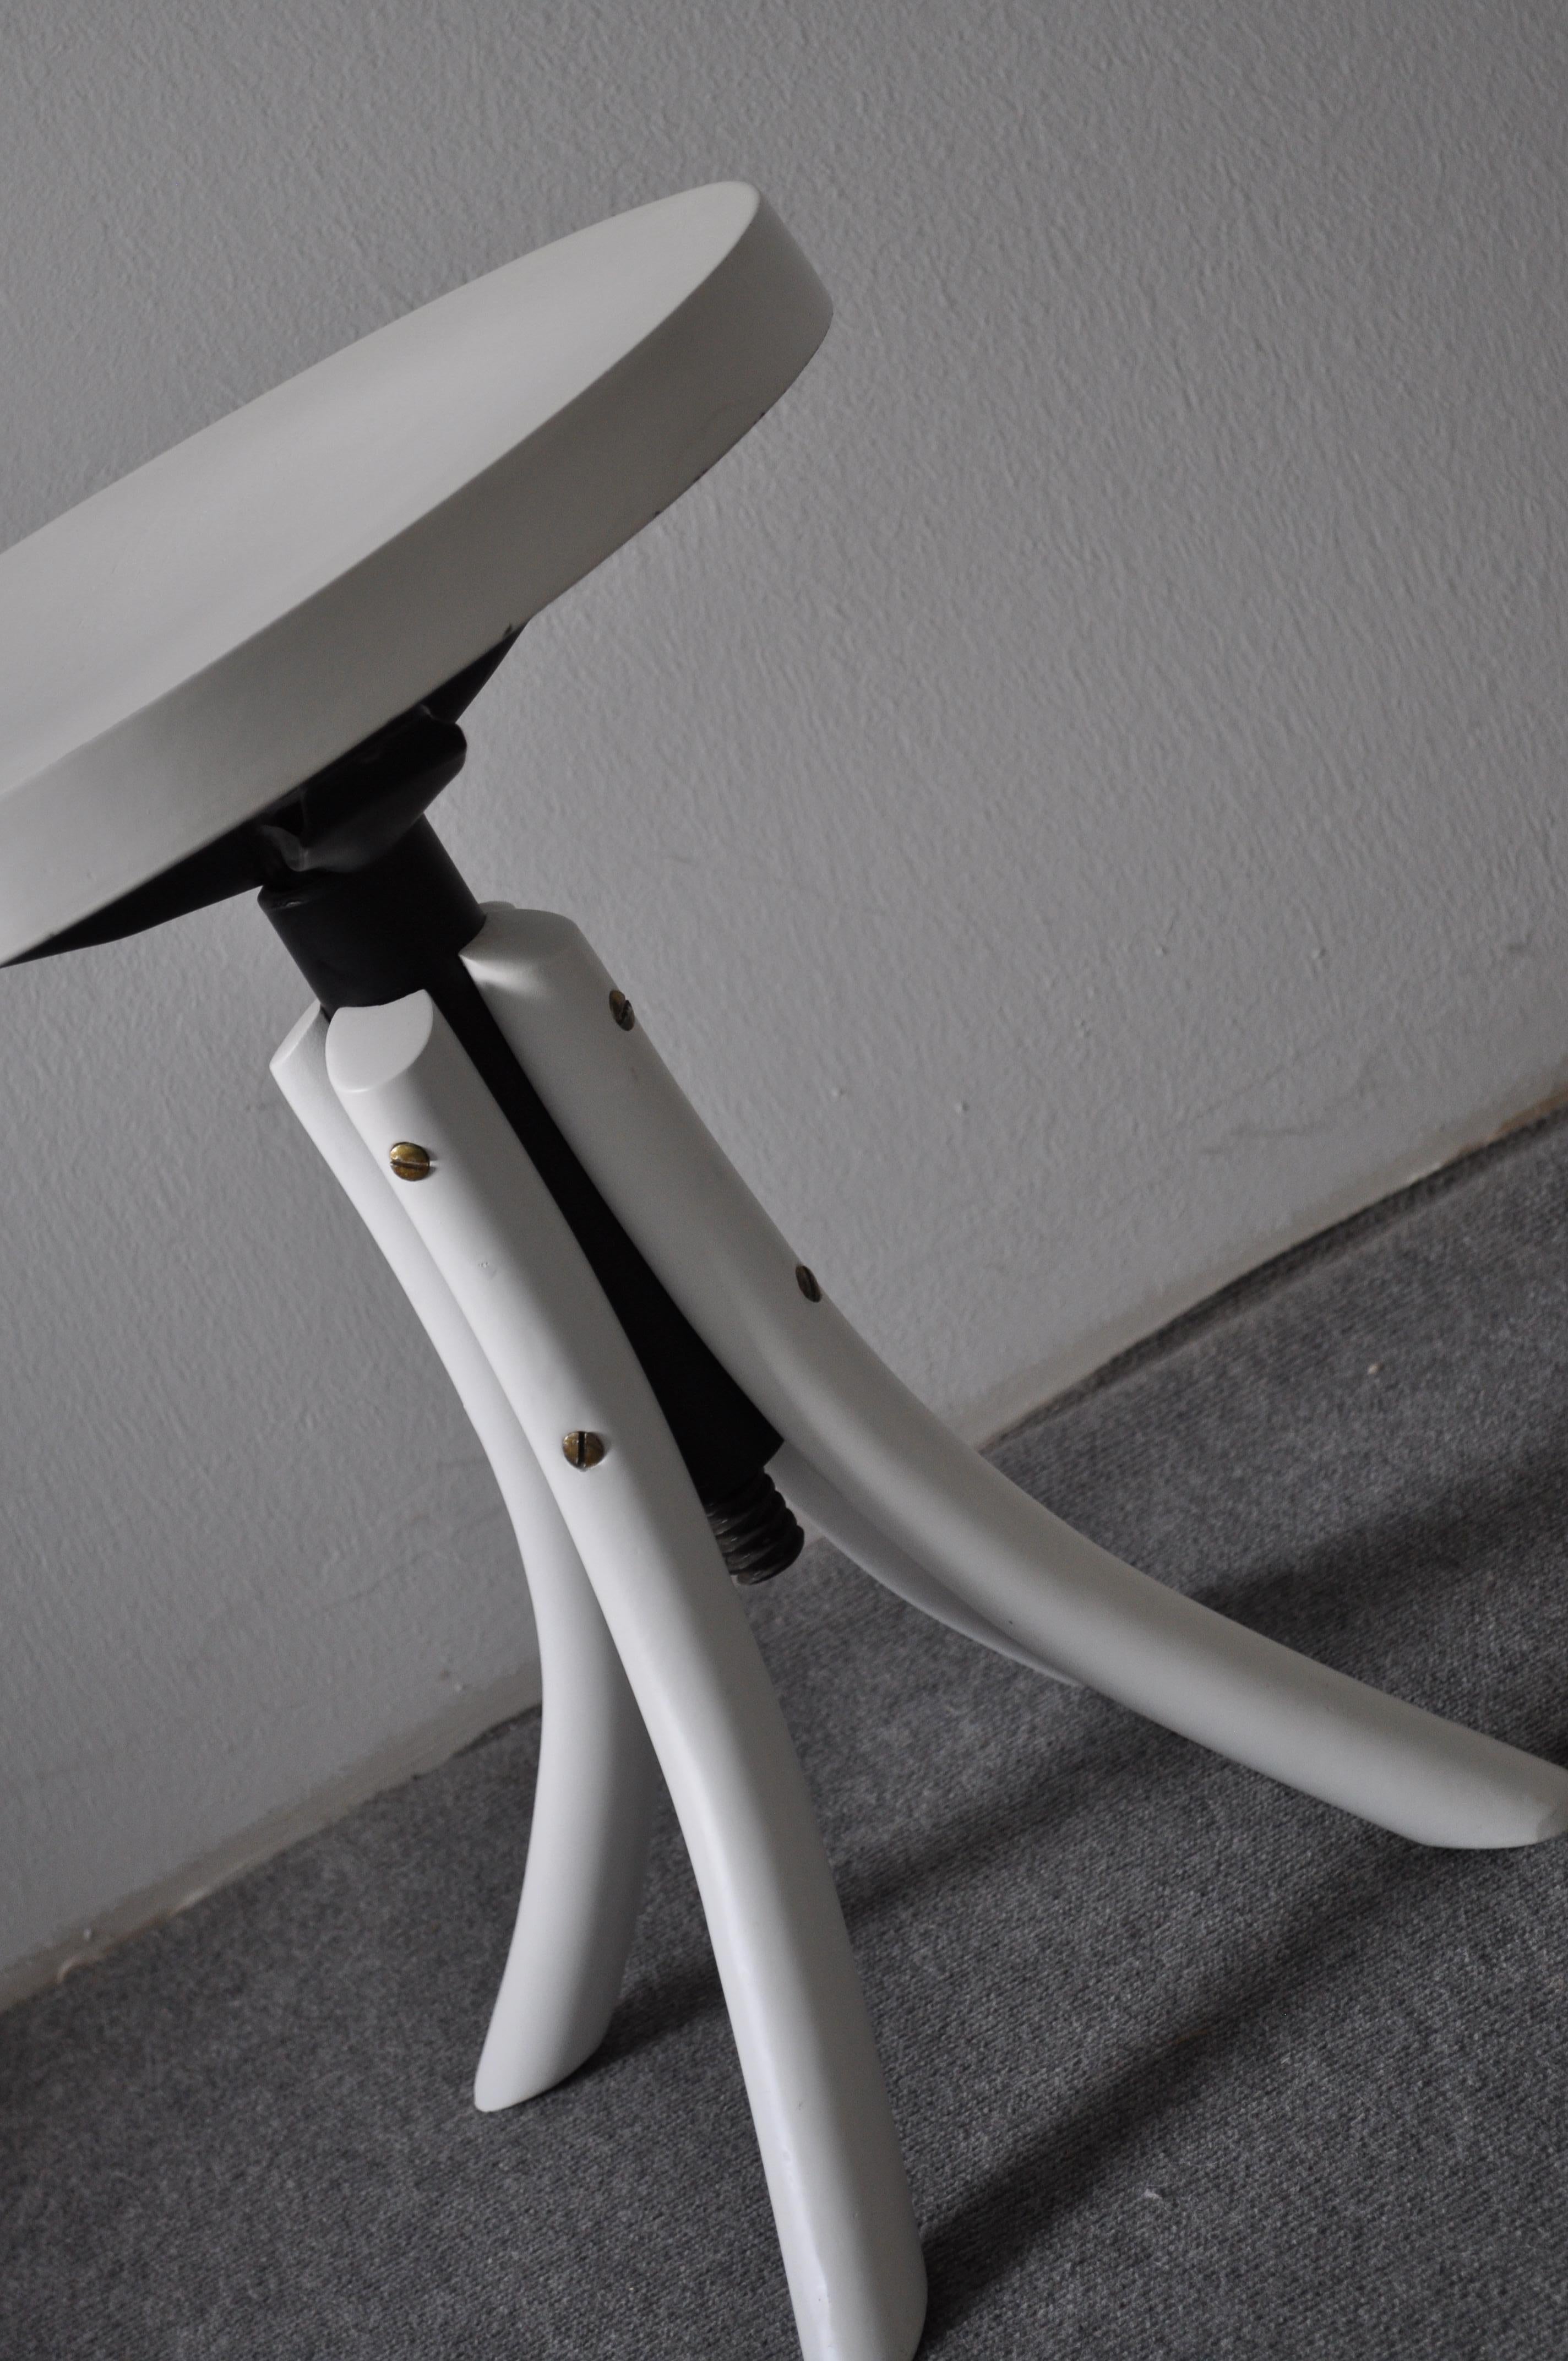 Vintage painted music stool.
White painted stool from Hungary.